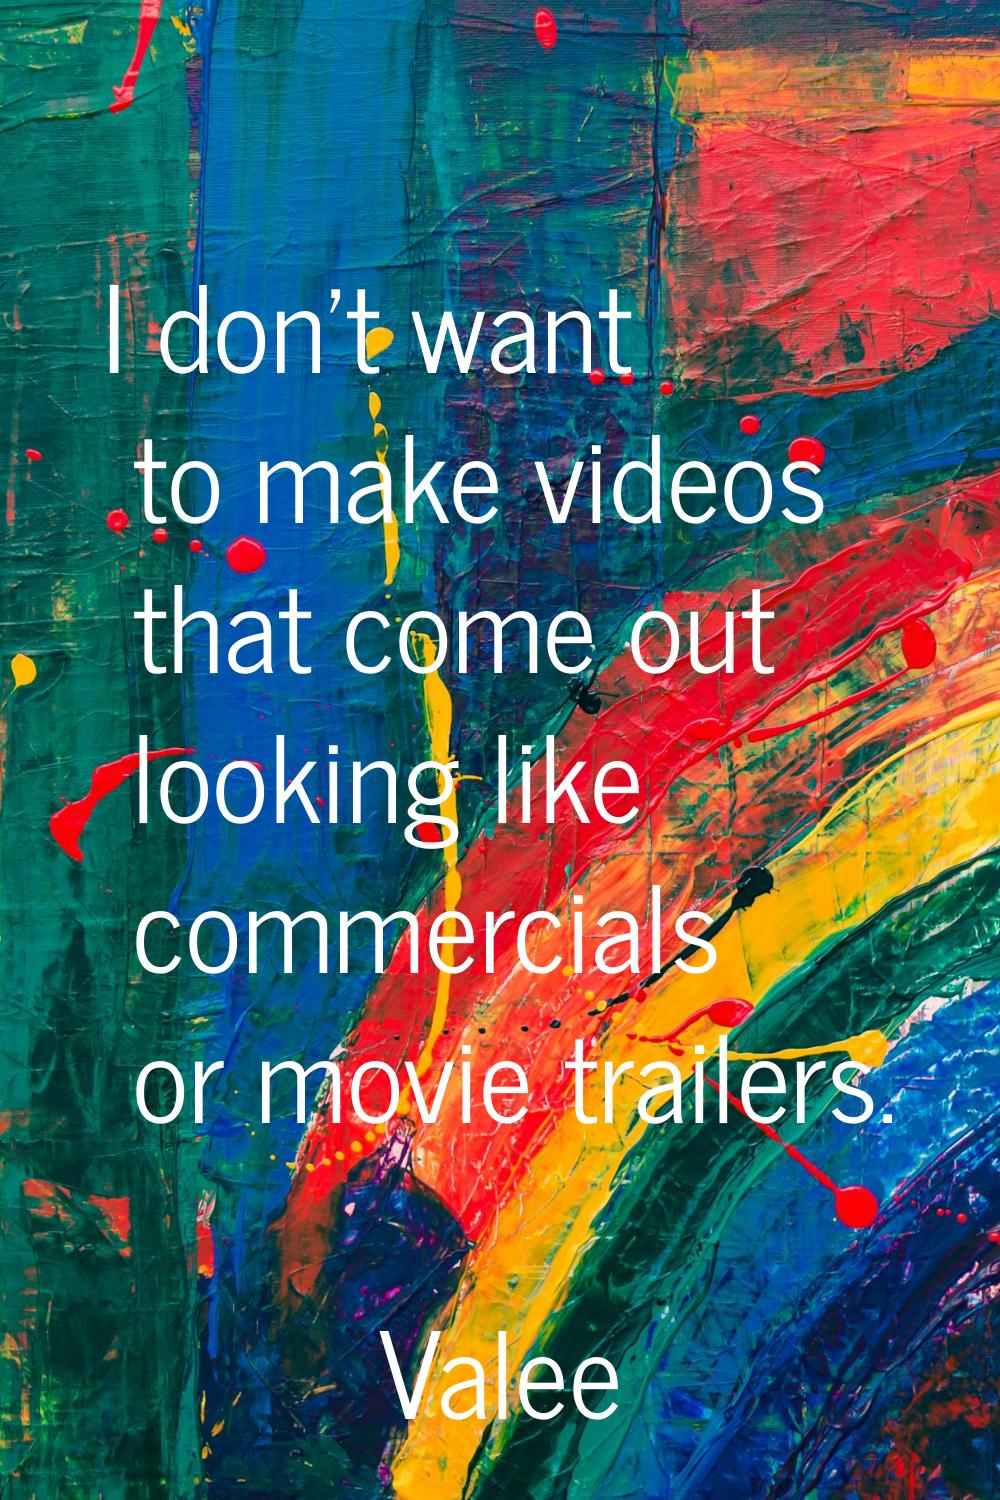 I don't want to make videos that come out looking like commercials or movie trailers.